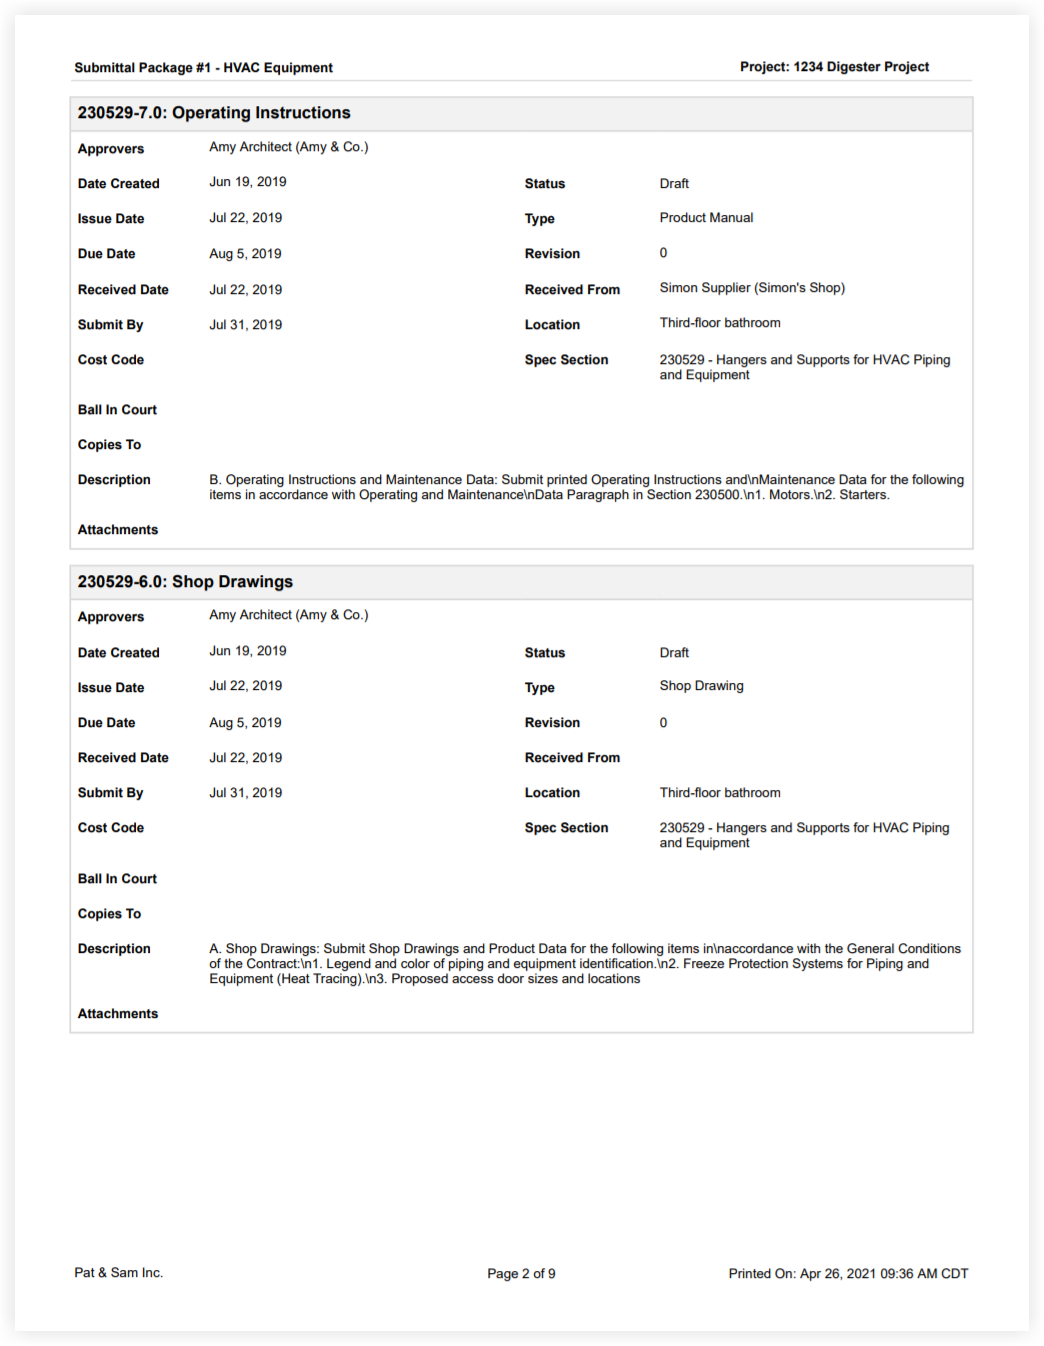 submittals-ann-updated-pdf-export-submittal-package-page-2.png